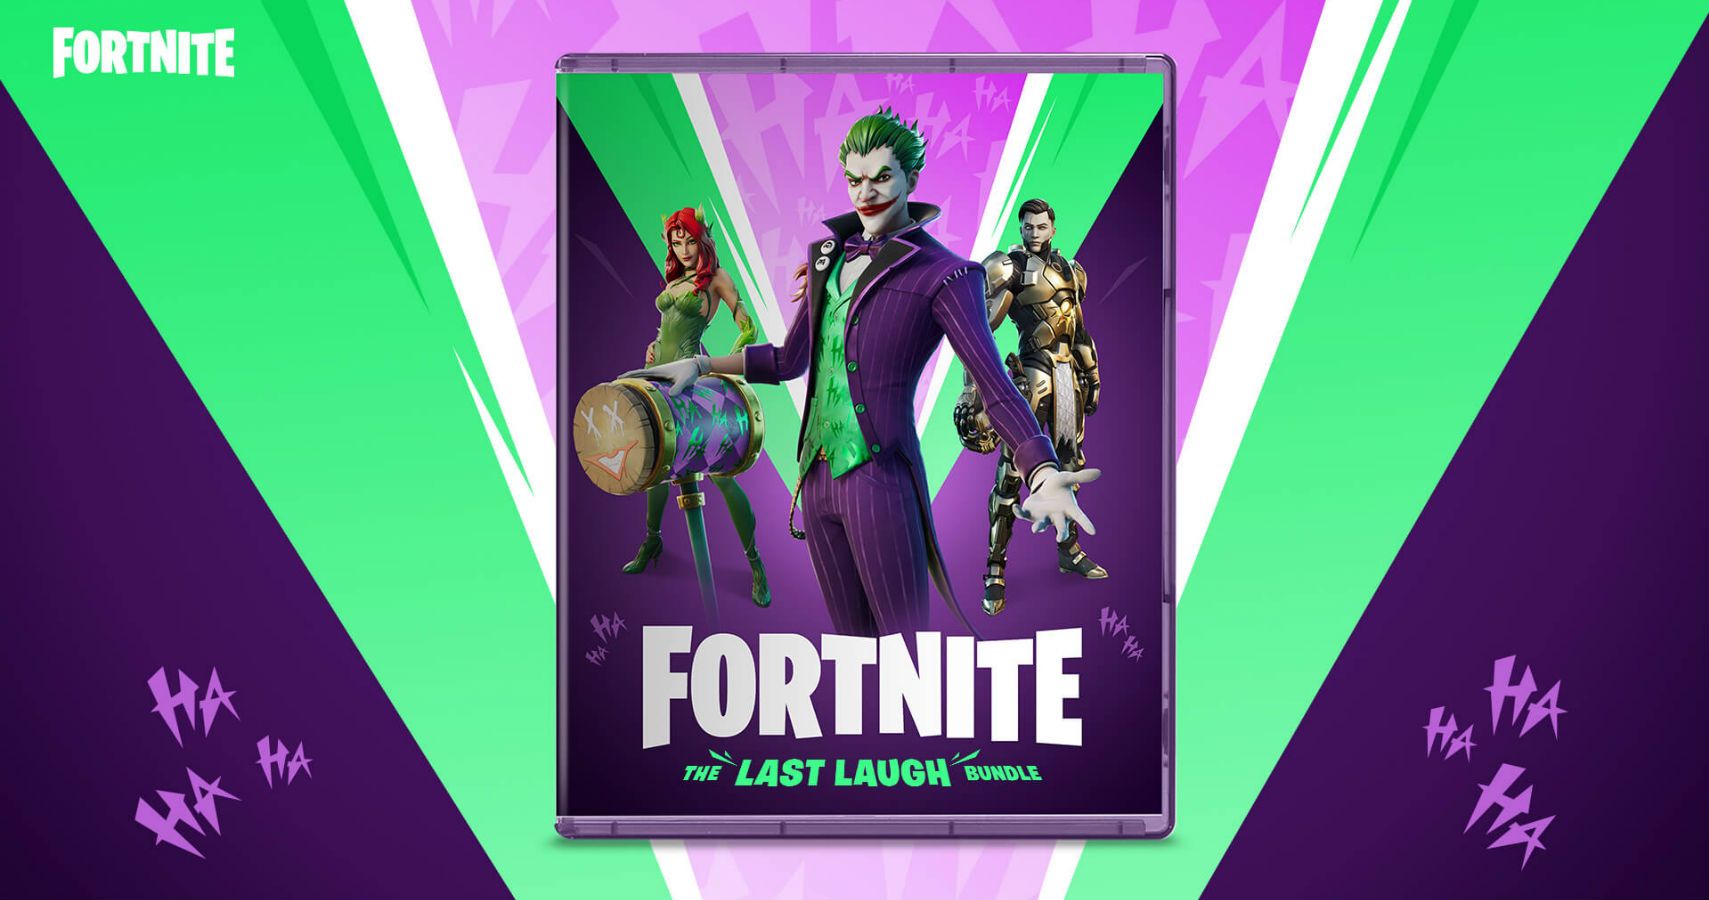 Joker, Poison Ivy Come To Fortnite In Last Laugh Bundle